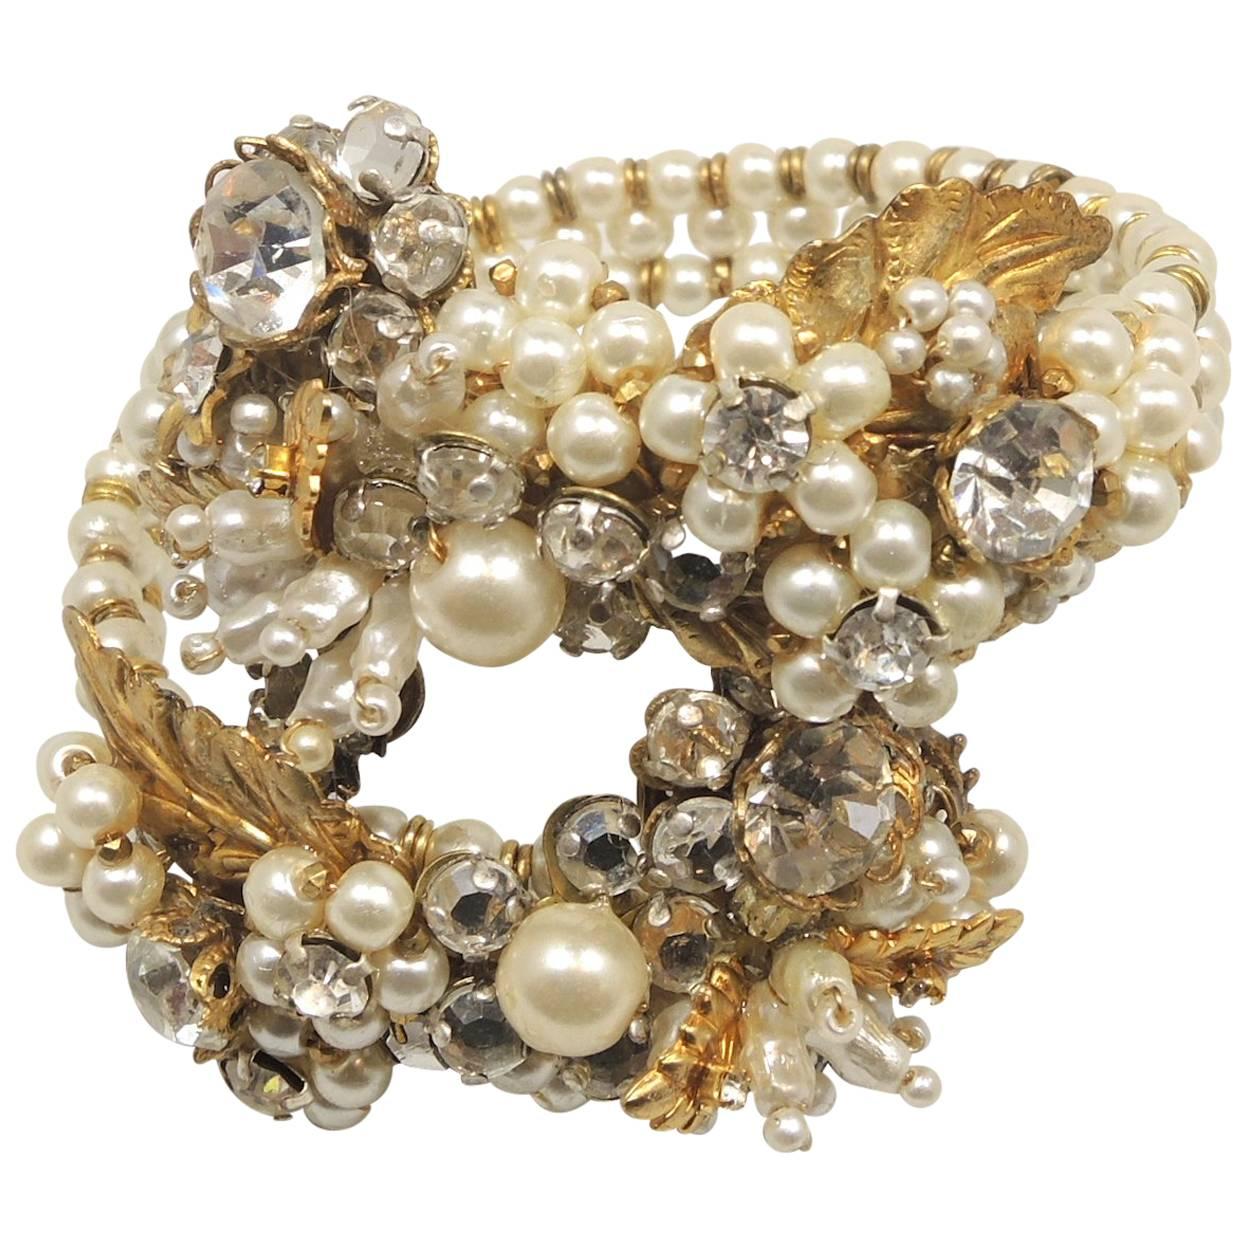 Early Miriam Haskell Faux Pearl Floral Coiled Bracelet